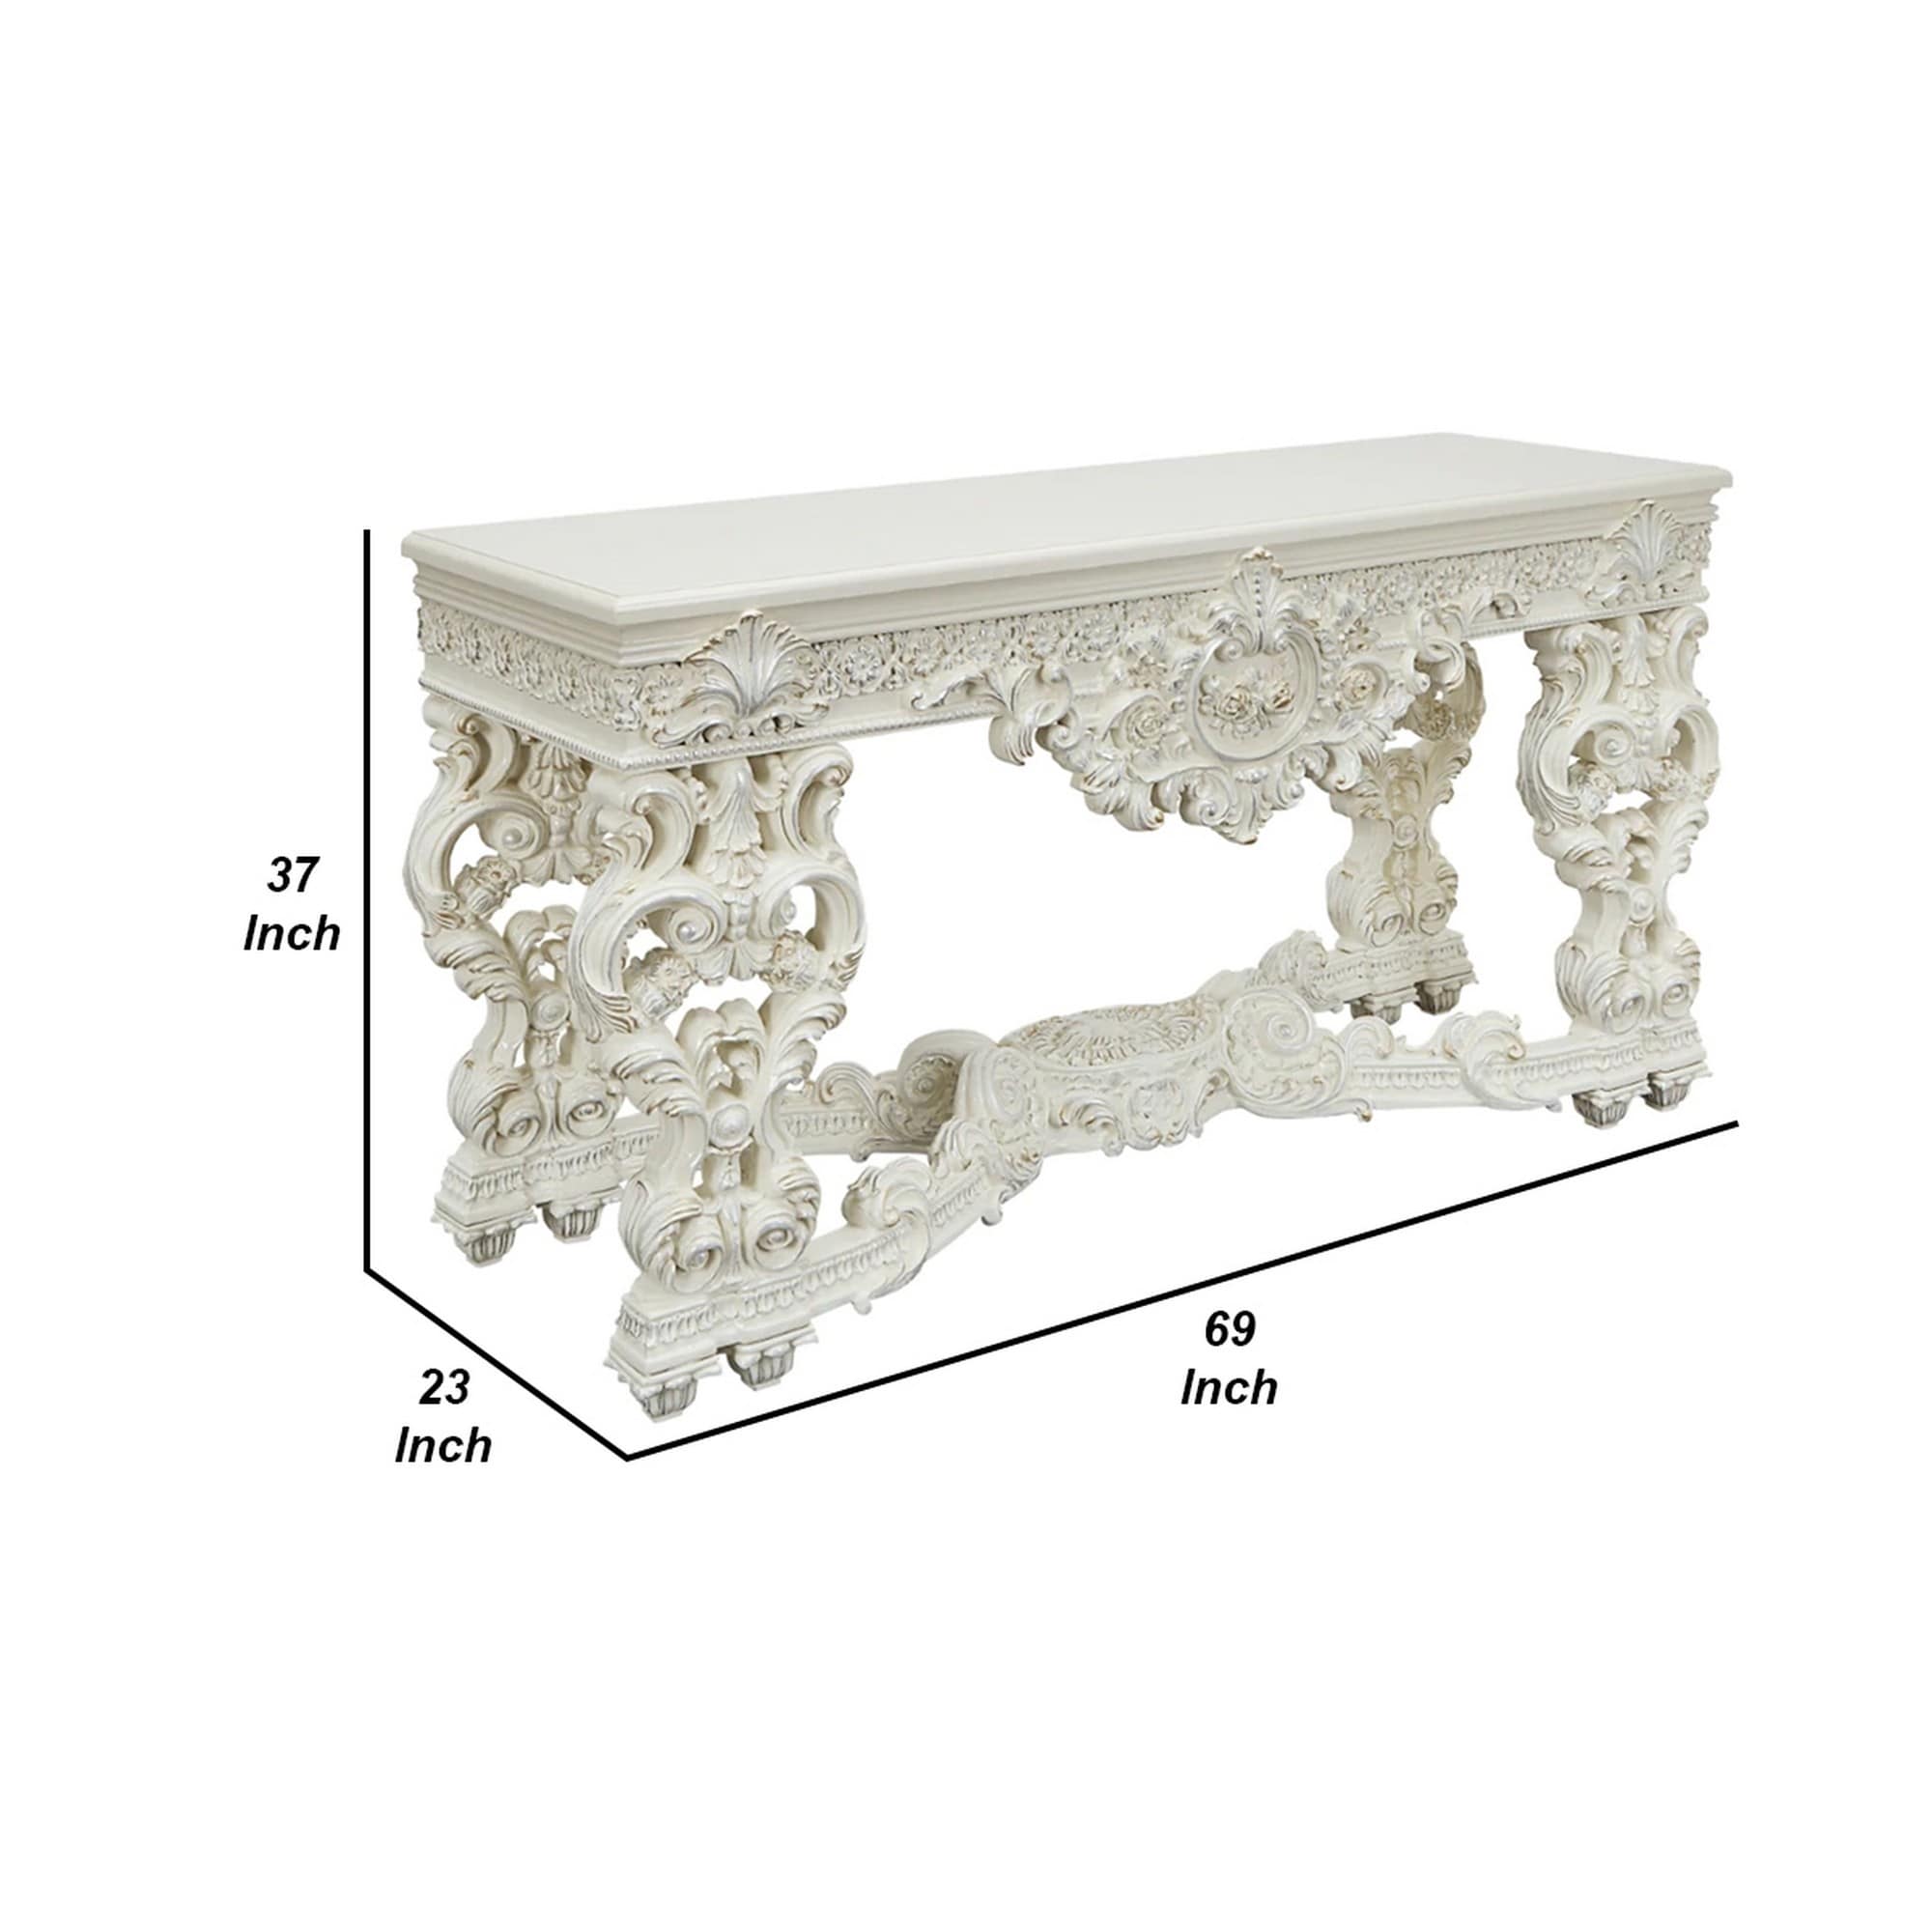 Ataa 69 Inch Rectangular Sofa Table, Ornate Floral Carved Legs, White